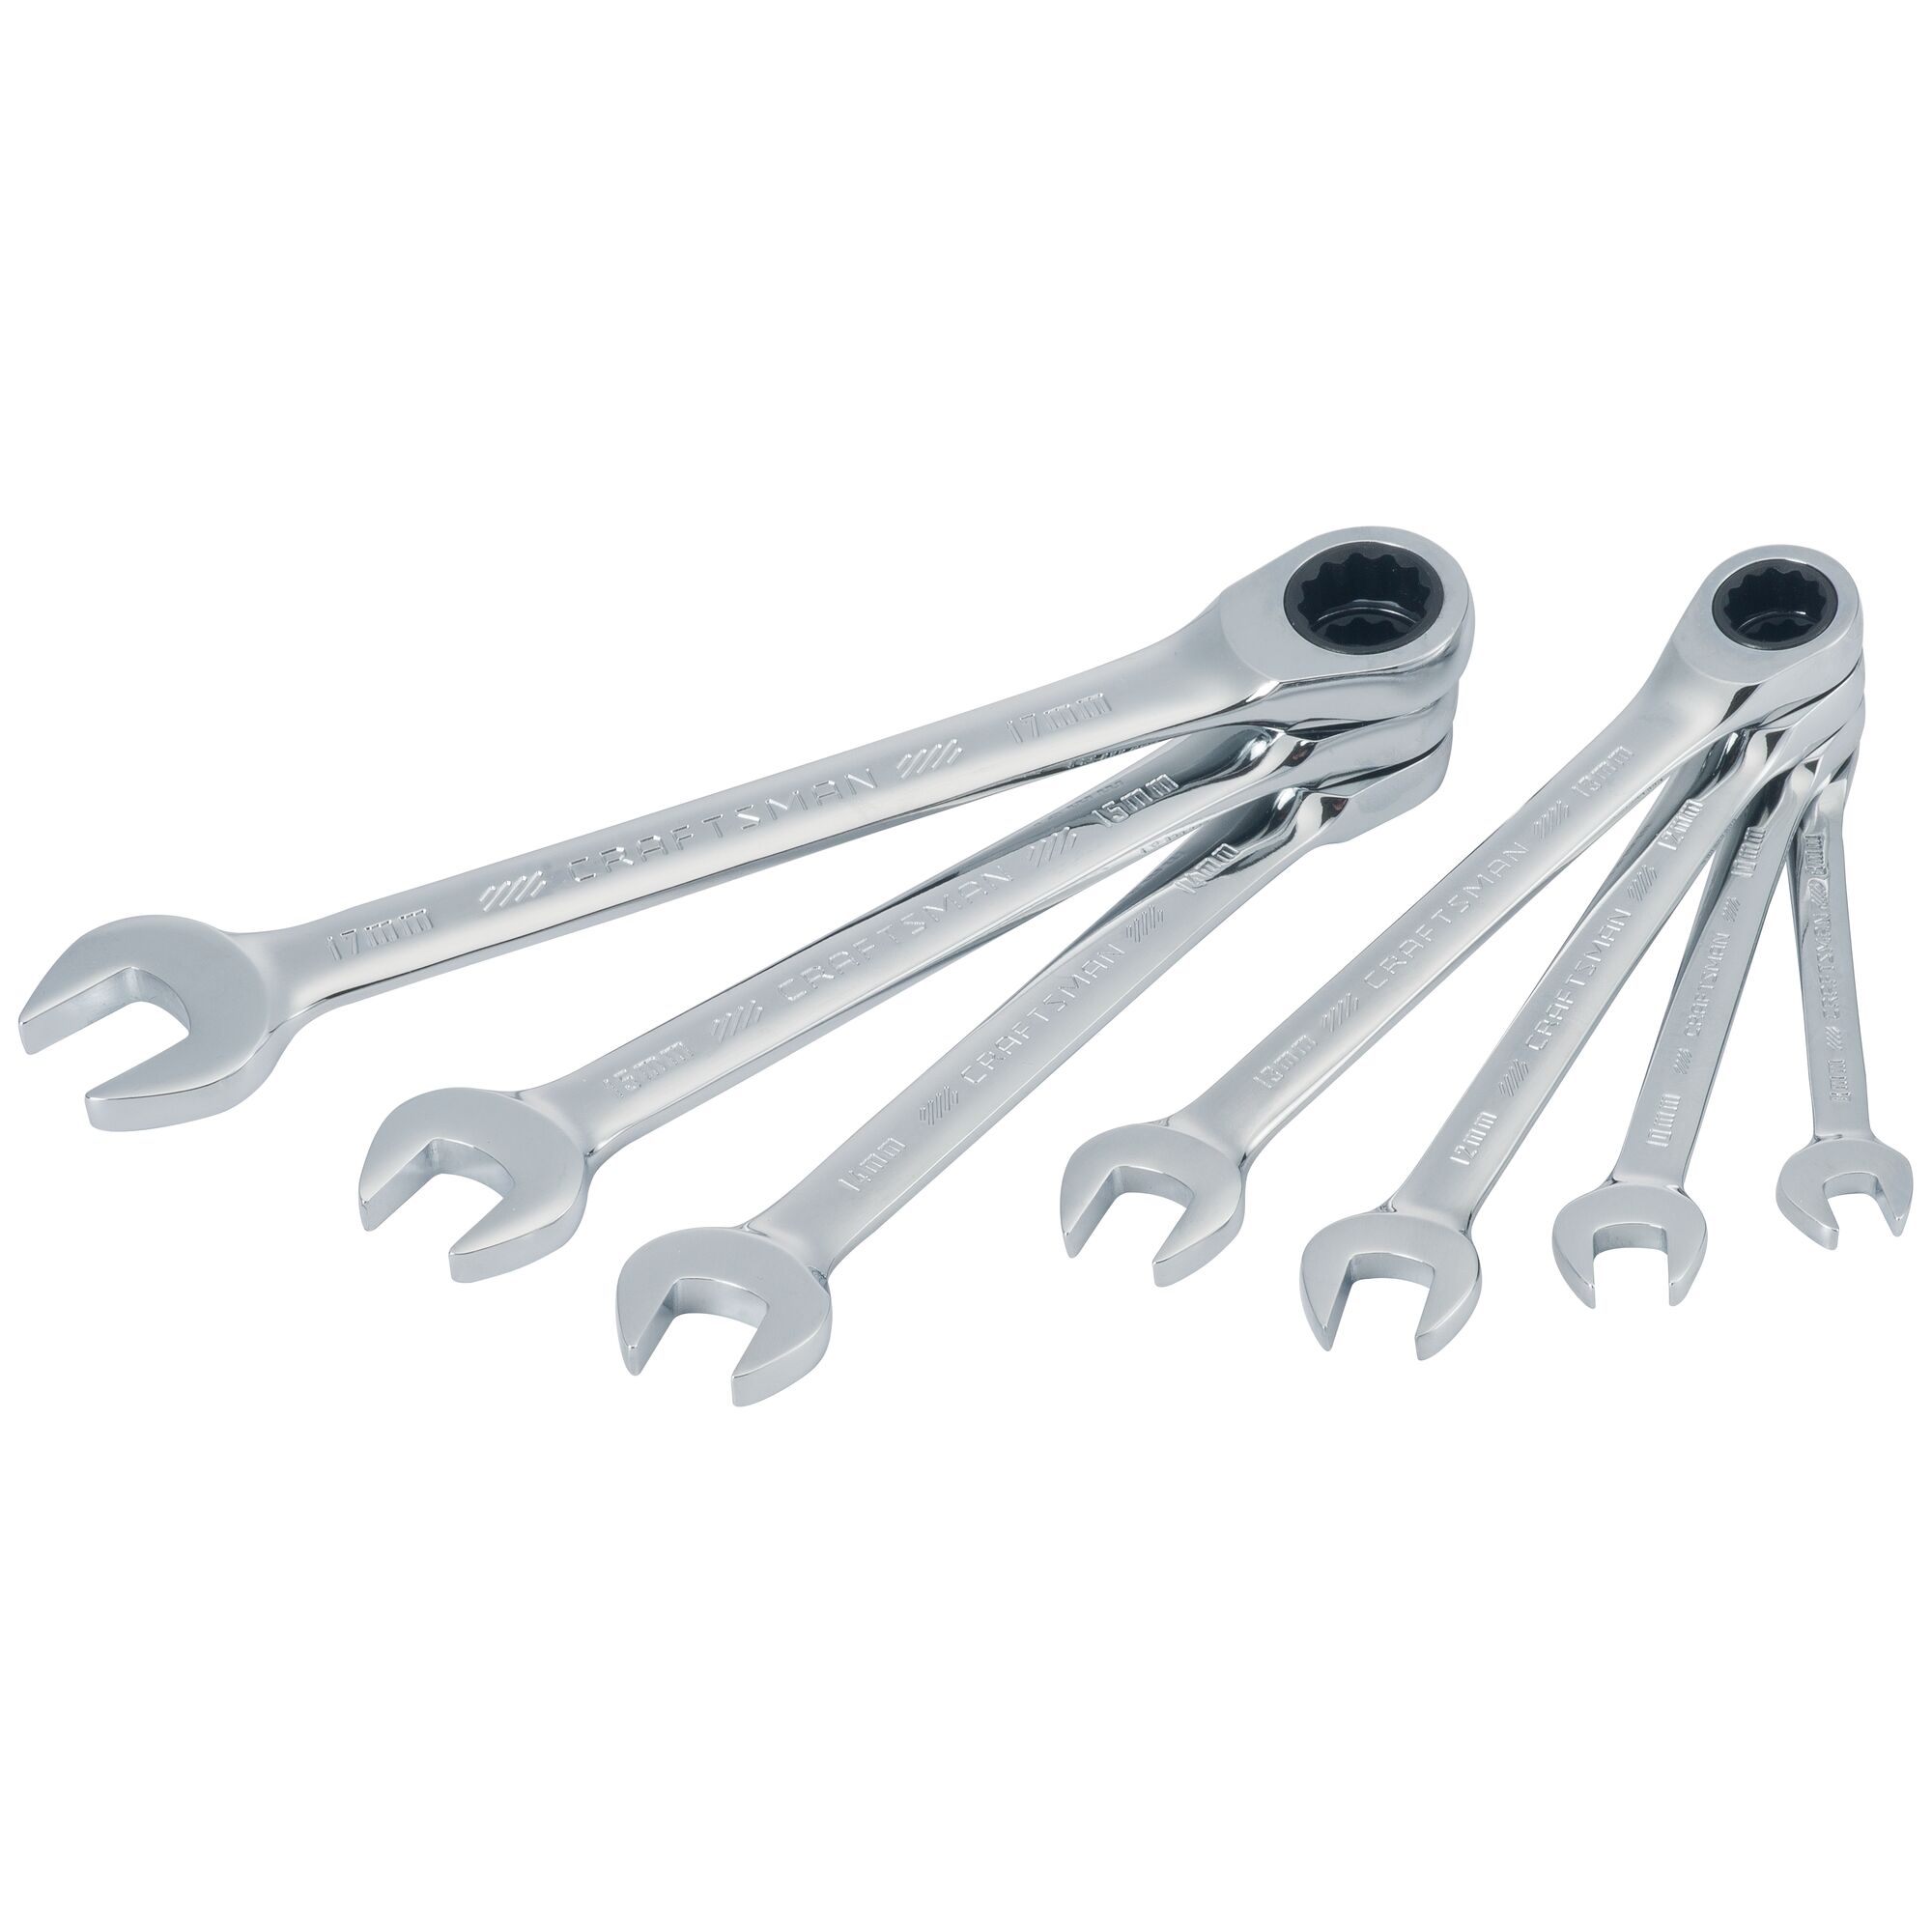 Profile of 7 piece metric ratcheting combination wrench set.